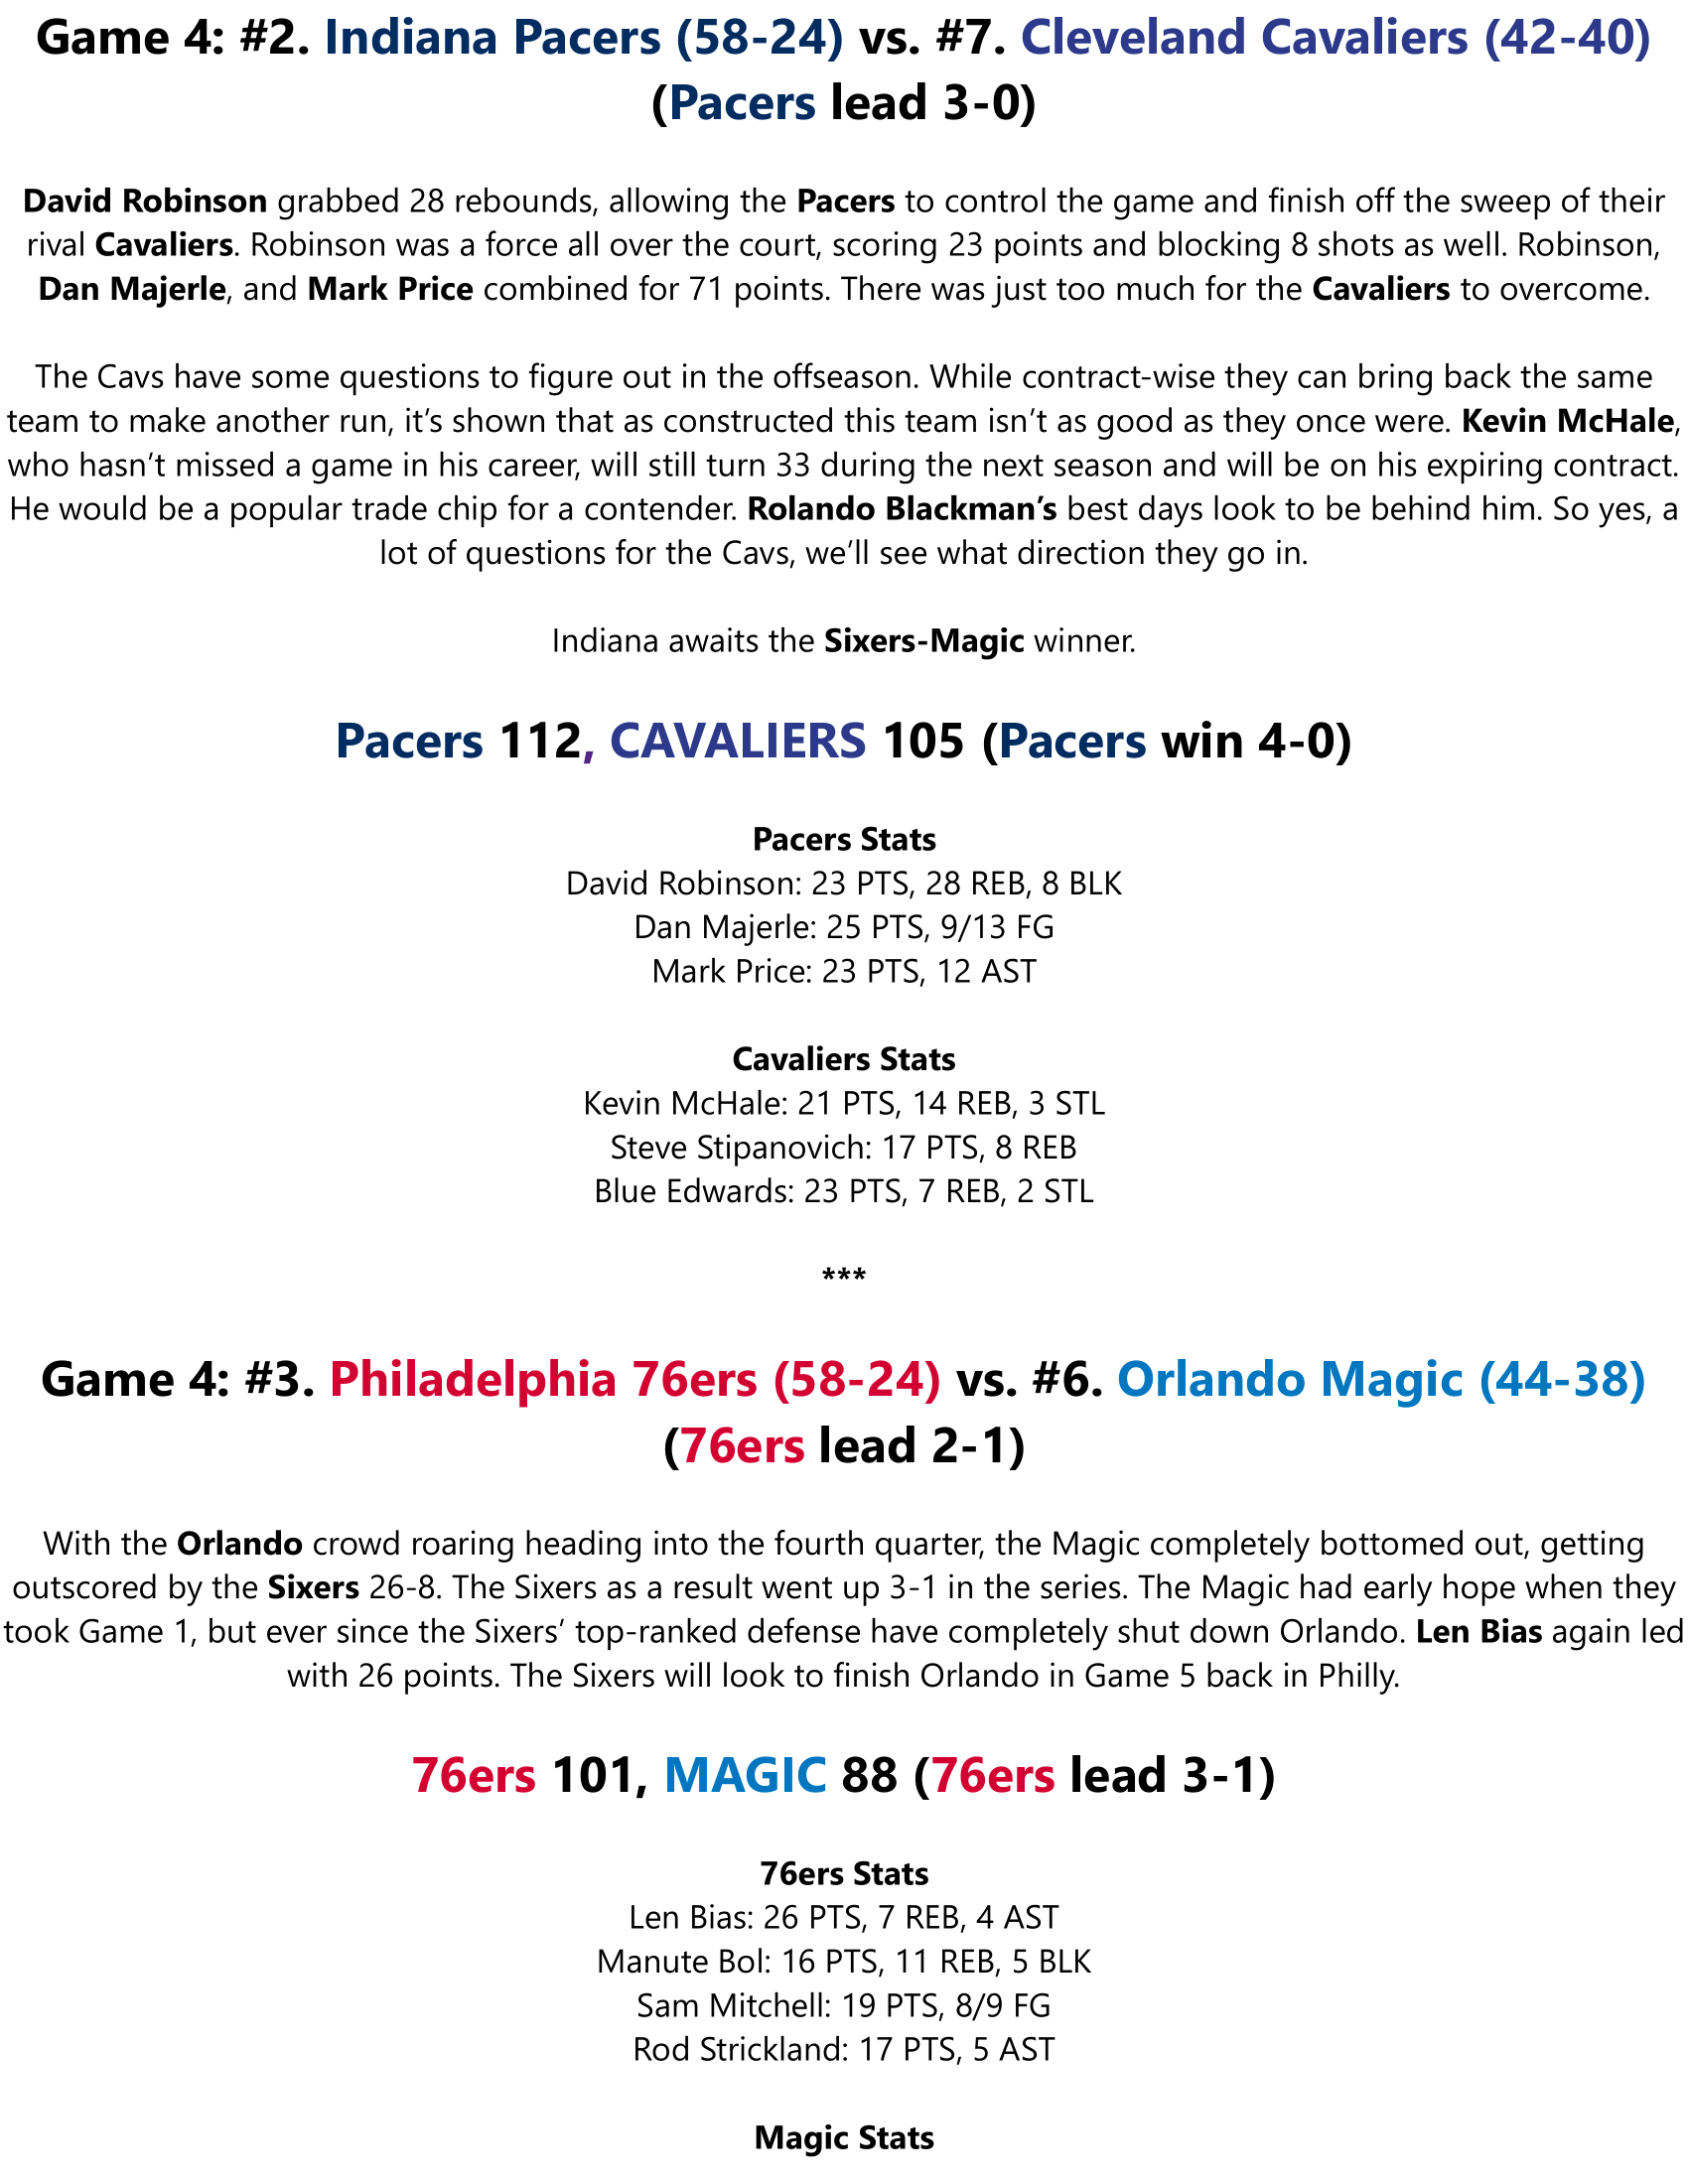 89-90-Part-5-Round-1-Semi-Preview-16.png